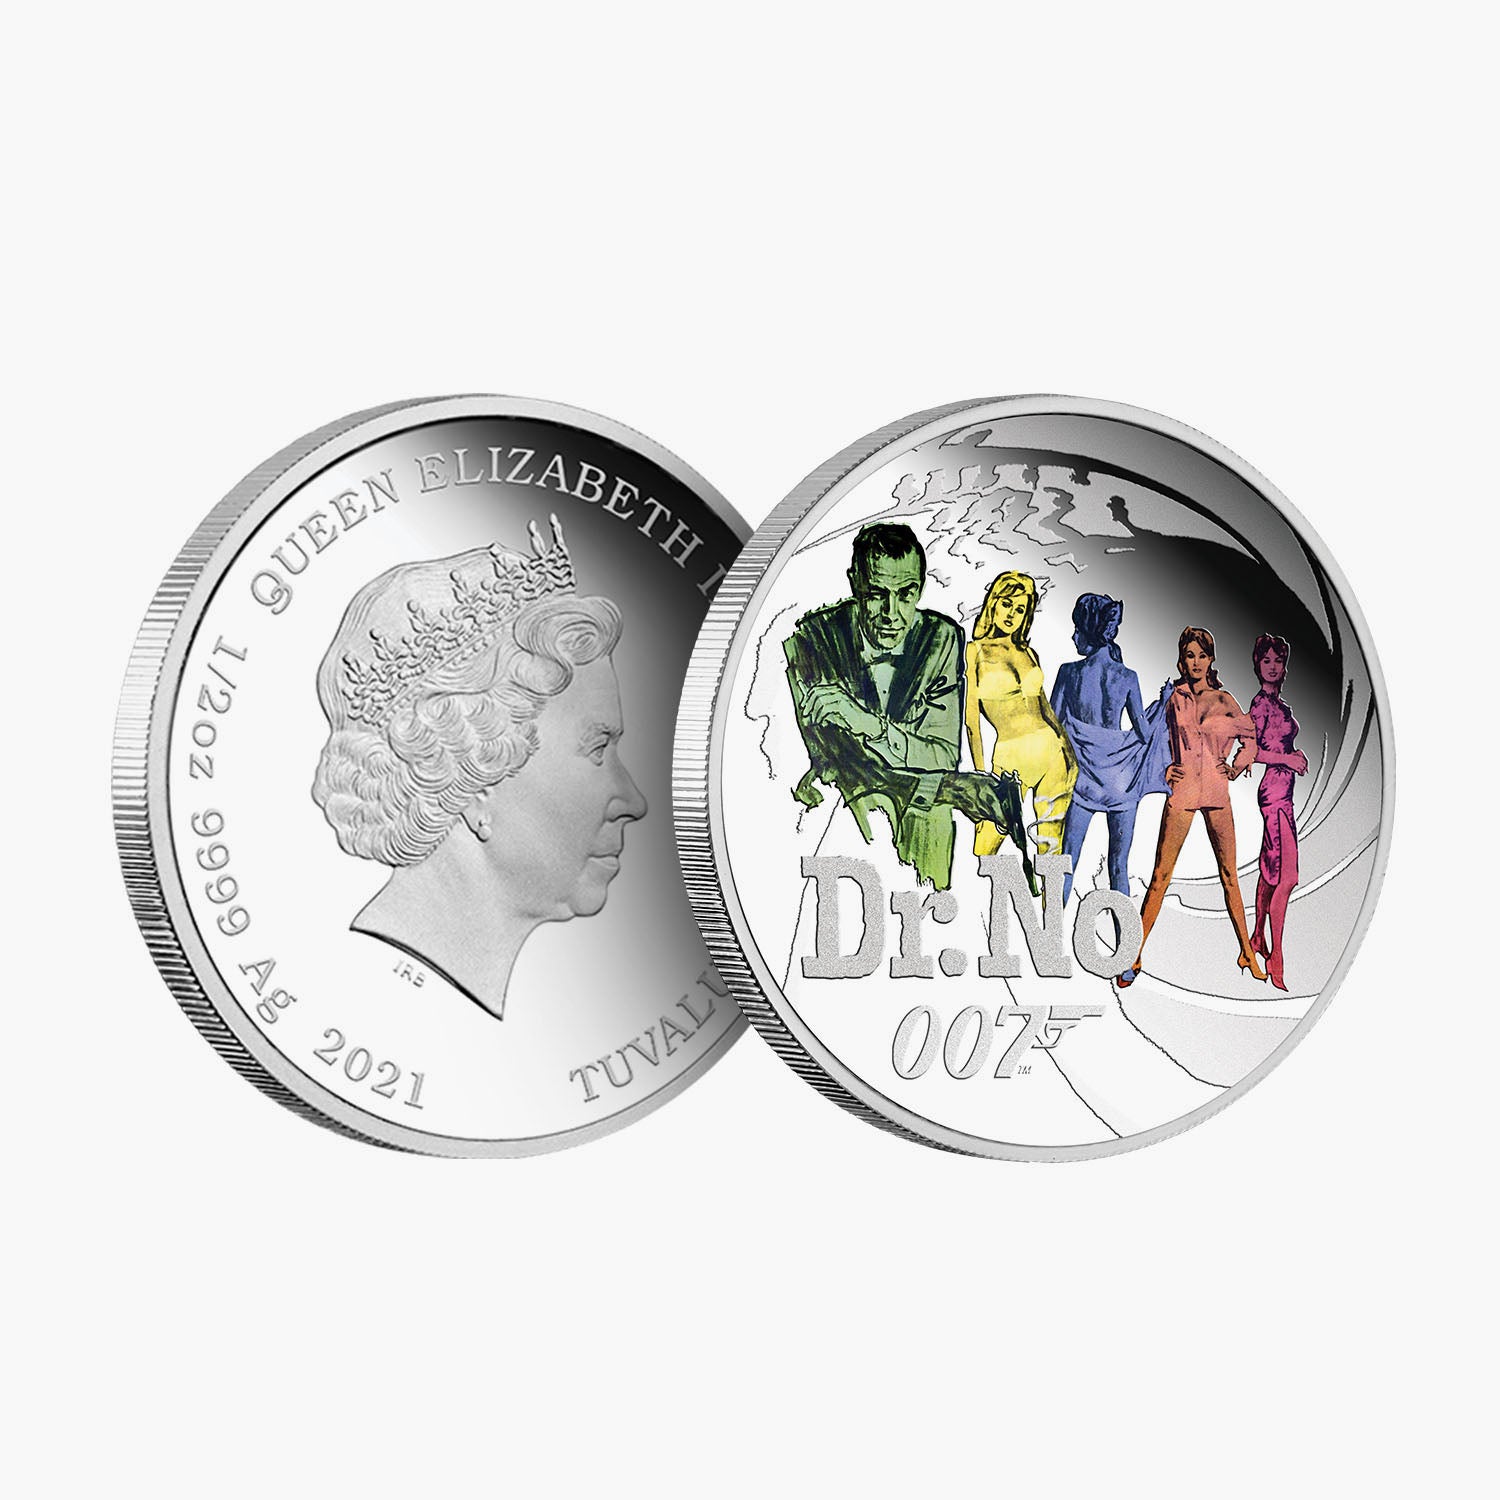 The James Bond 60th Anniversary Solid Silver Coin Set